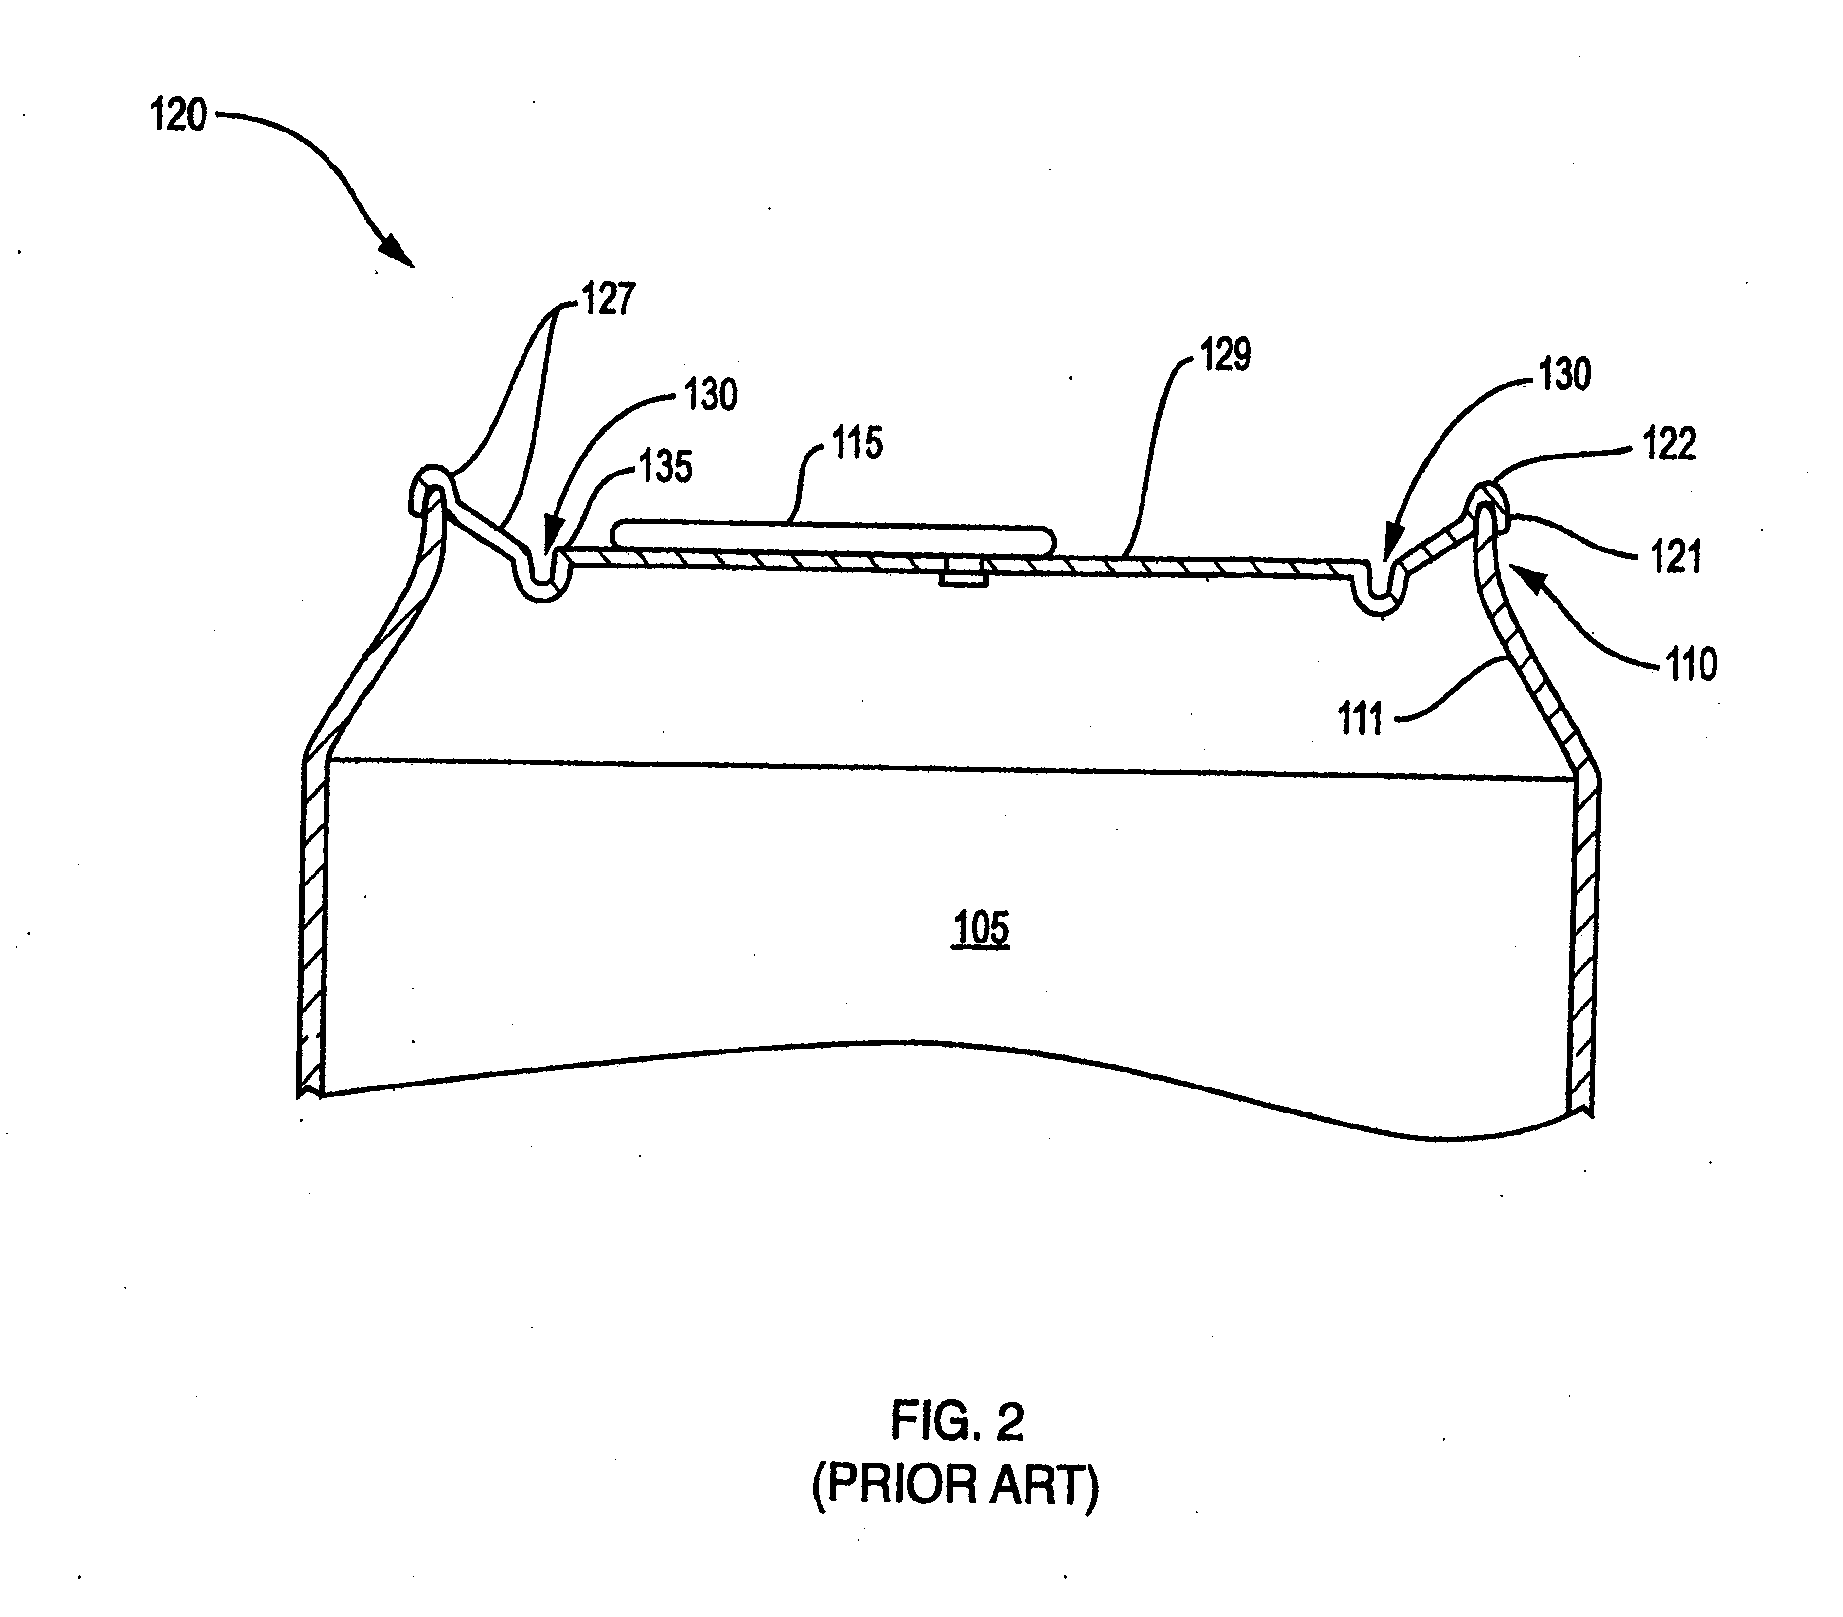 Beverage can marketing device